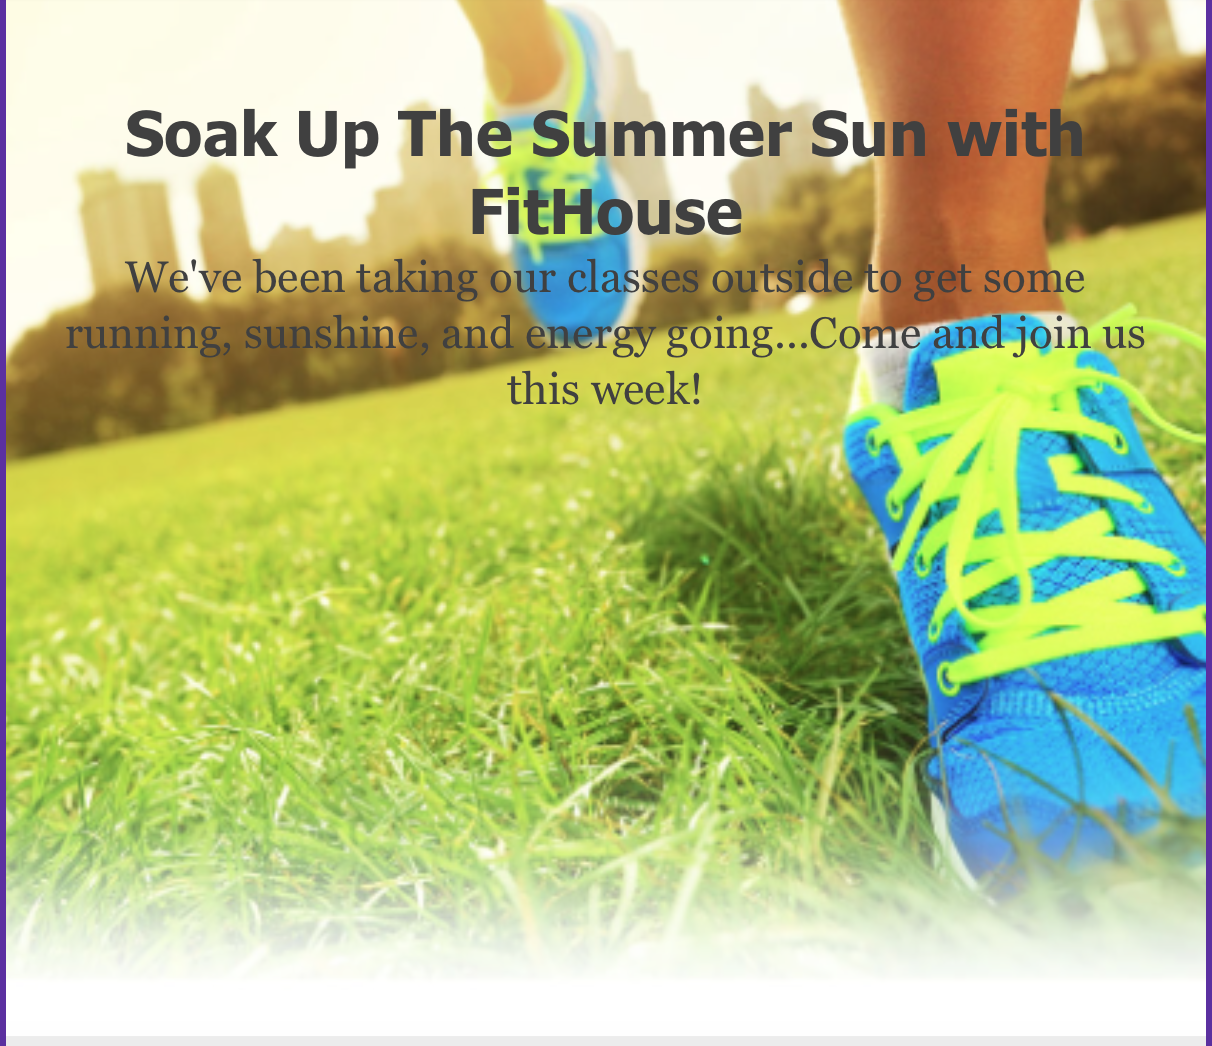 Soak Up The Summer Sun With FitHouse